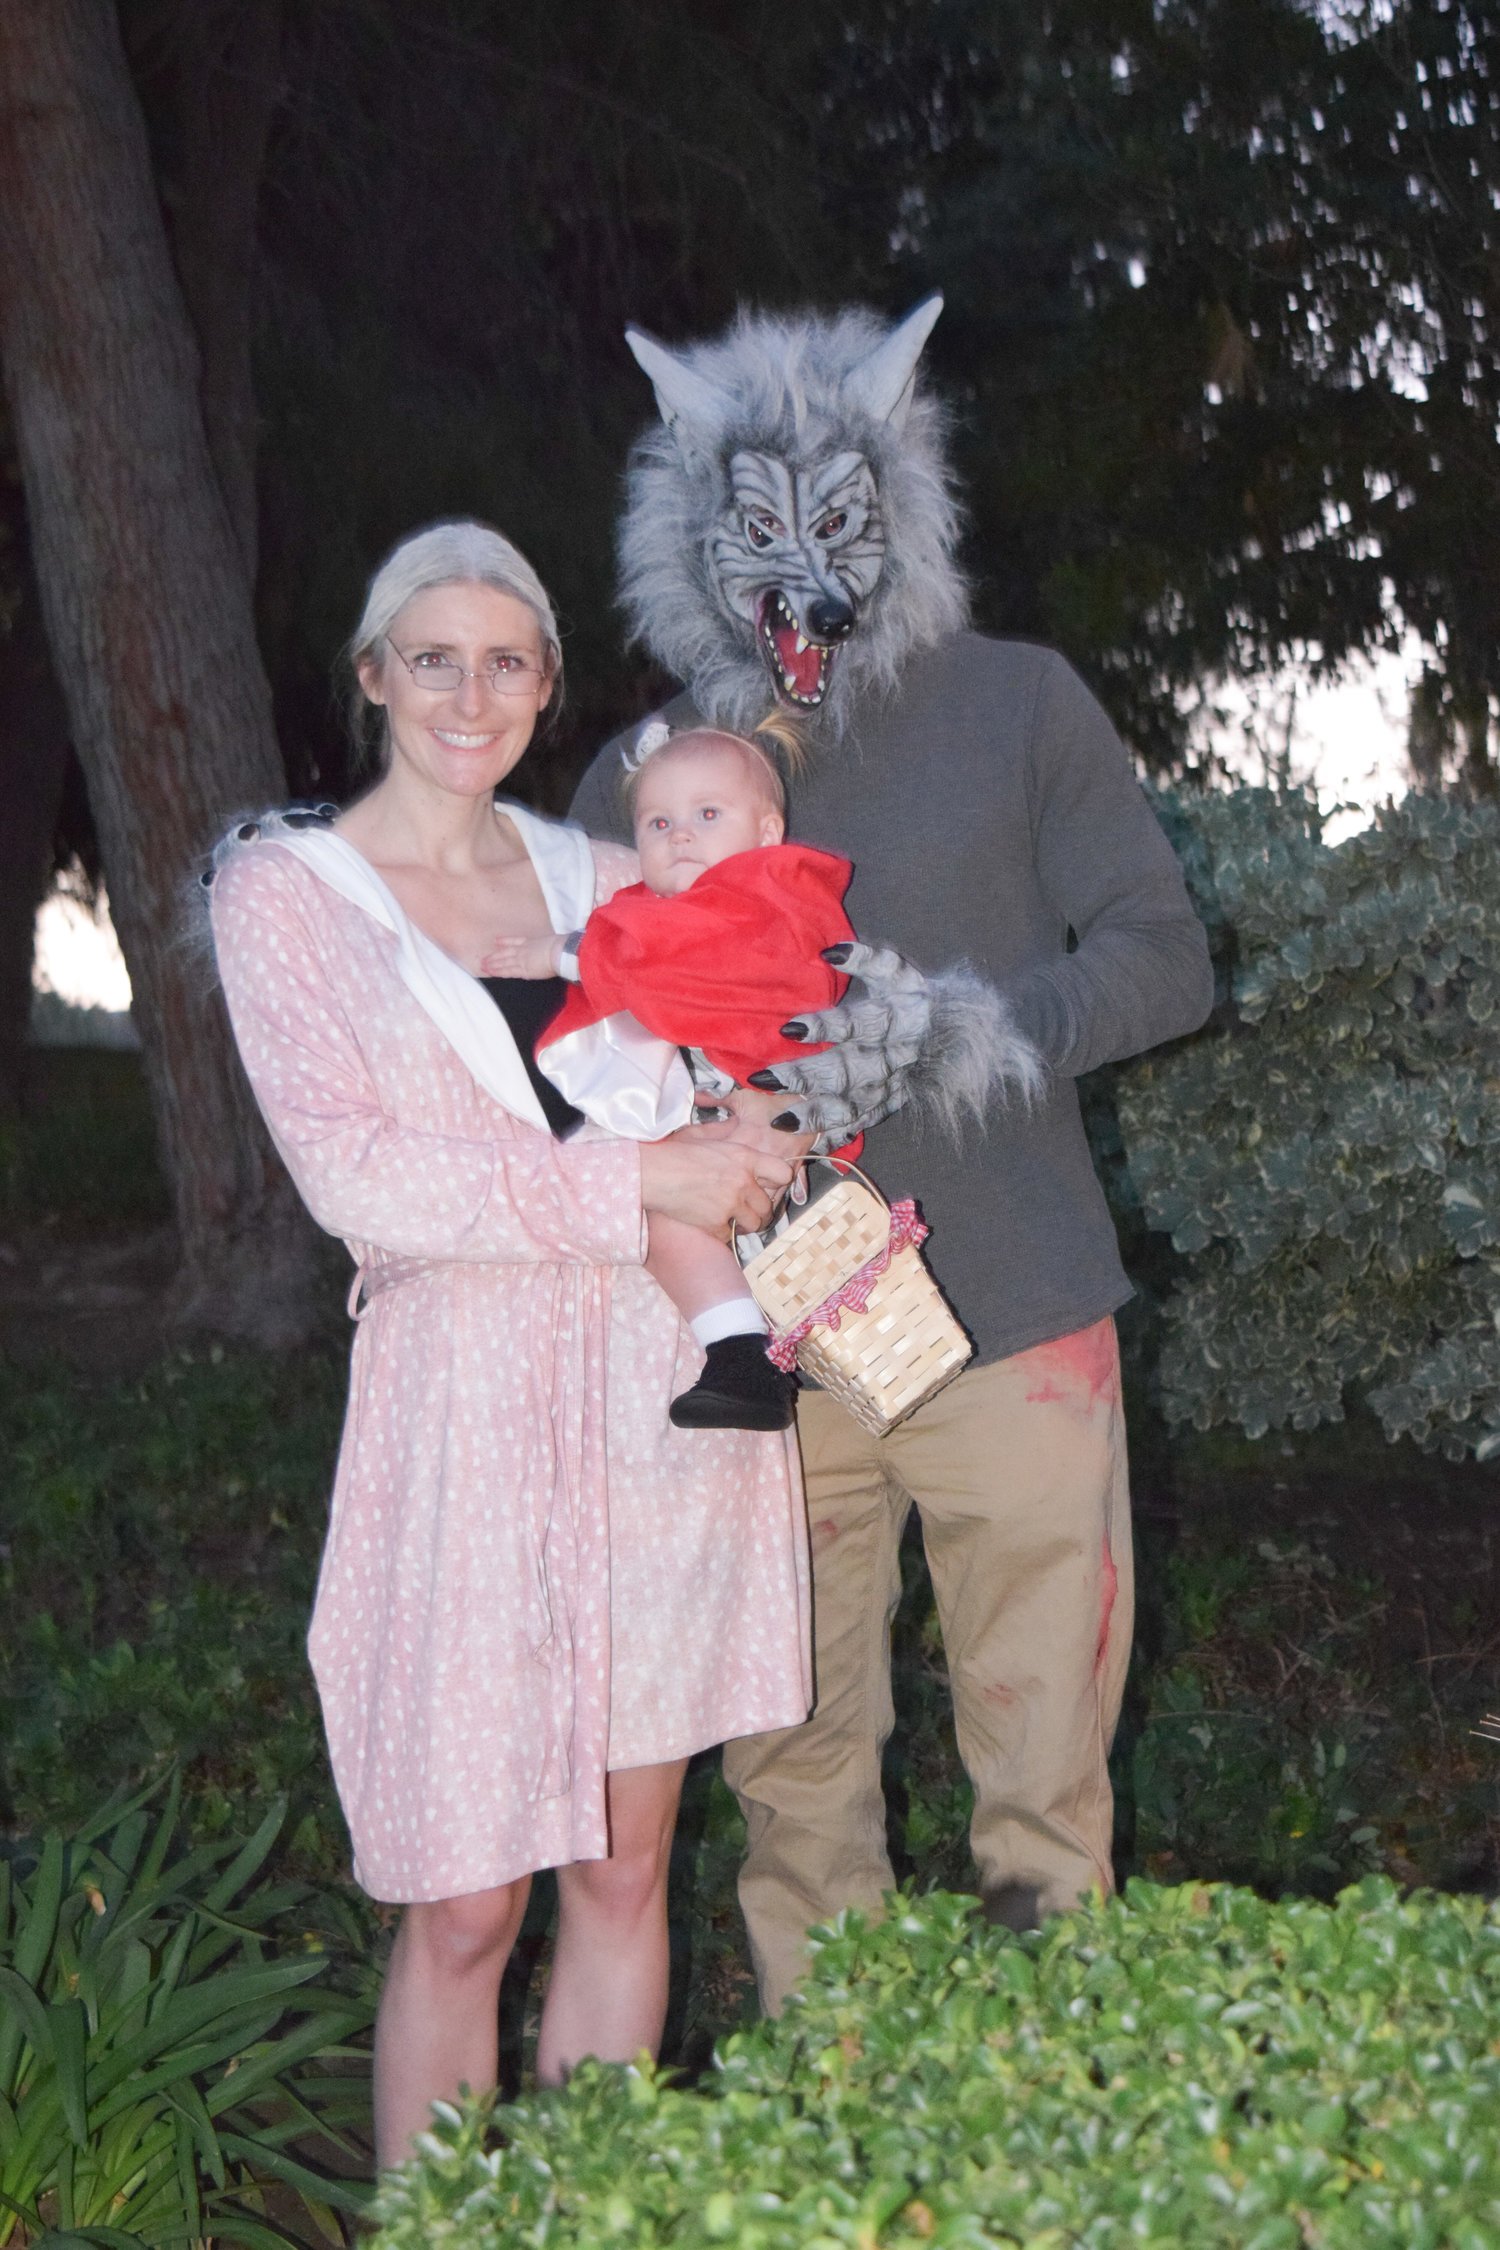 6 Family Halloween Costume Ideas - Little Red Riding Hood